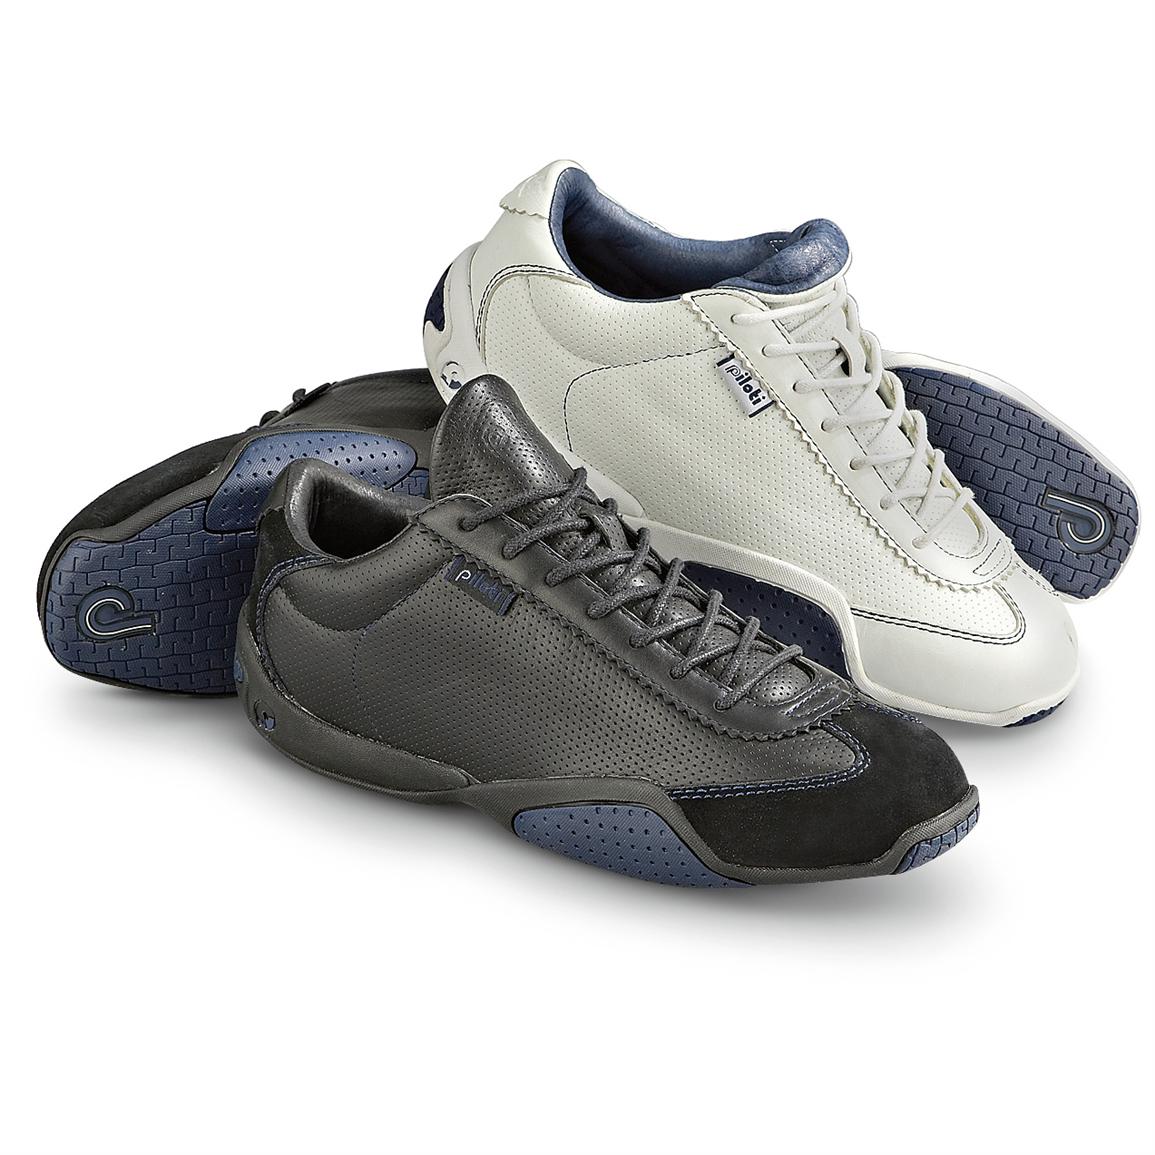 Men's PilotiÂ® Scuderia Driving Shoes - 162033, Running Shoes & Sneakers at Sportsman's Guide